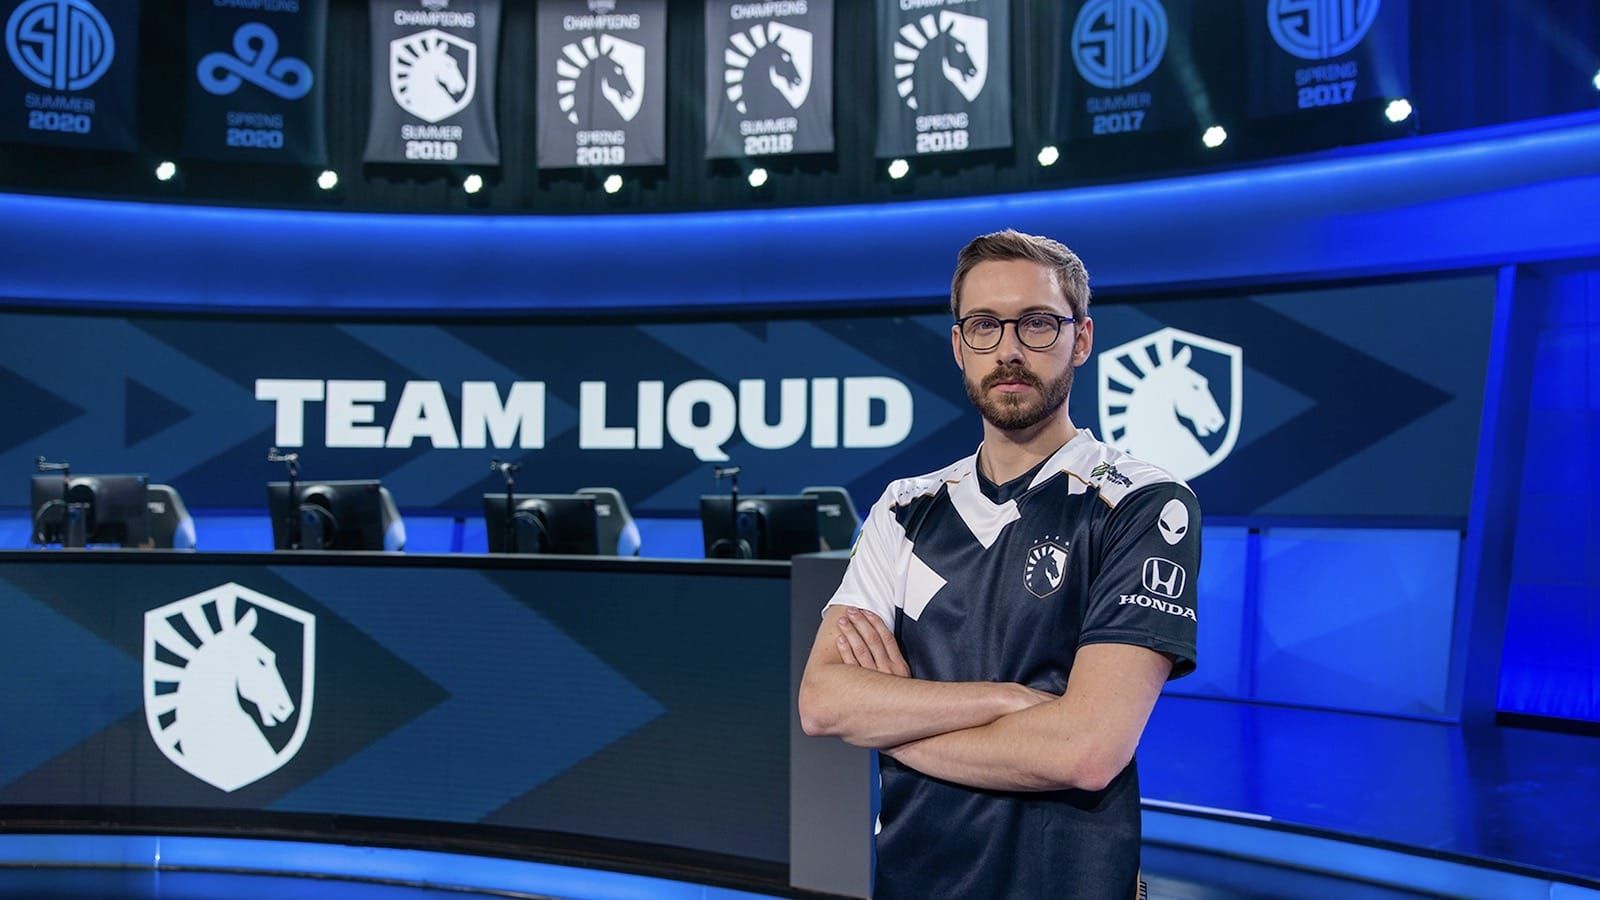 League of legends player Bjergsen poses on the LCS stage with his new Team Liquid jersey and the team name in the background